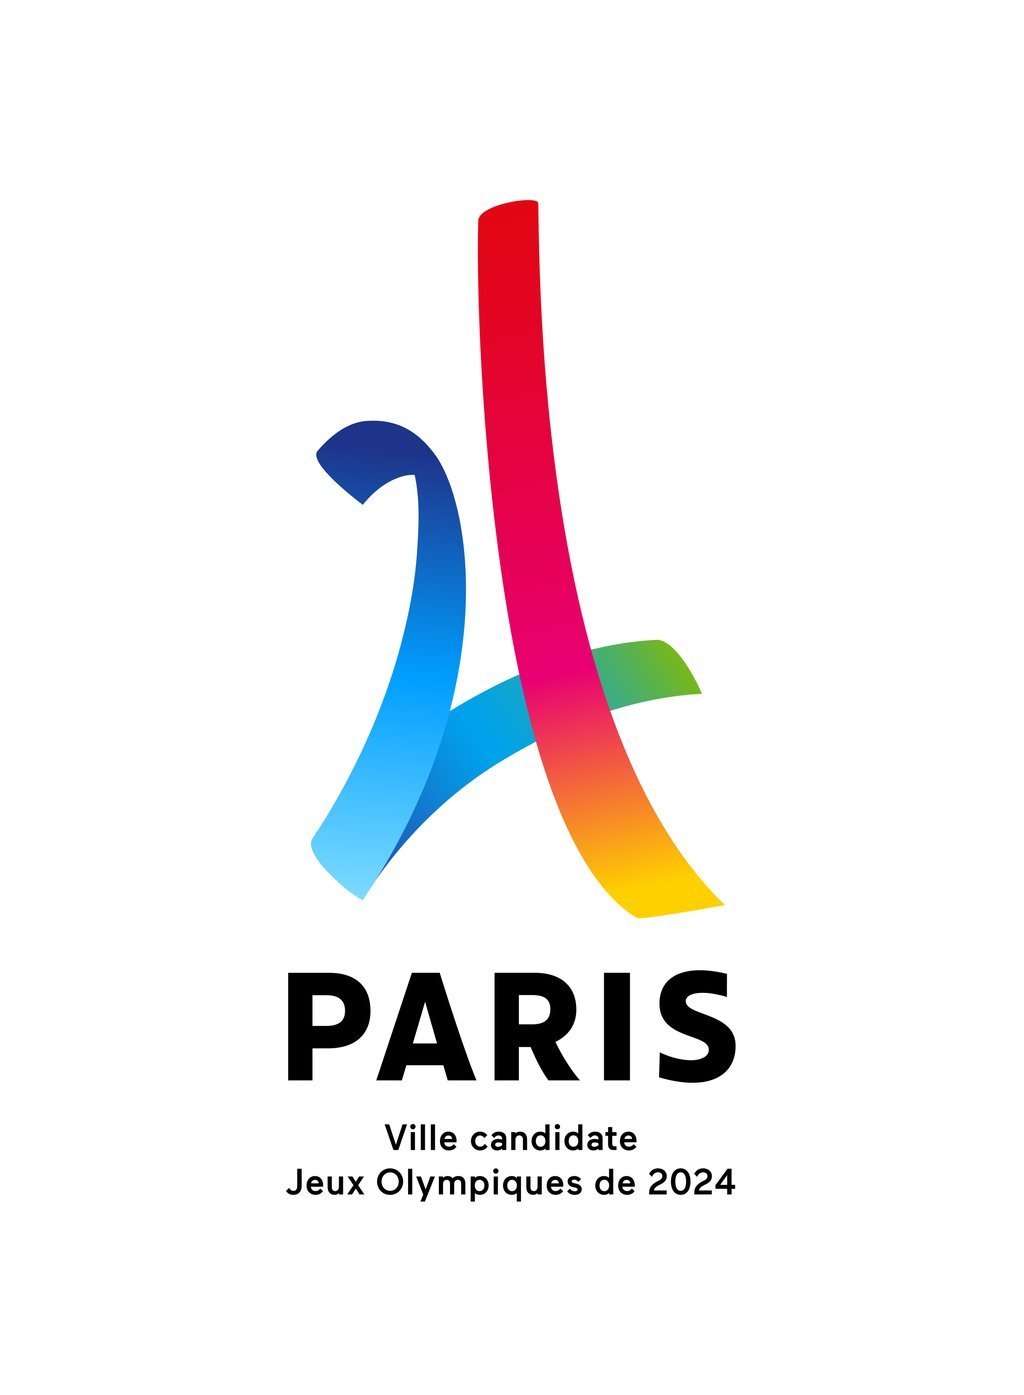 LA and Paris Focused 2024, Not Interested in Hosting 2028 Olympics